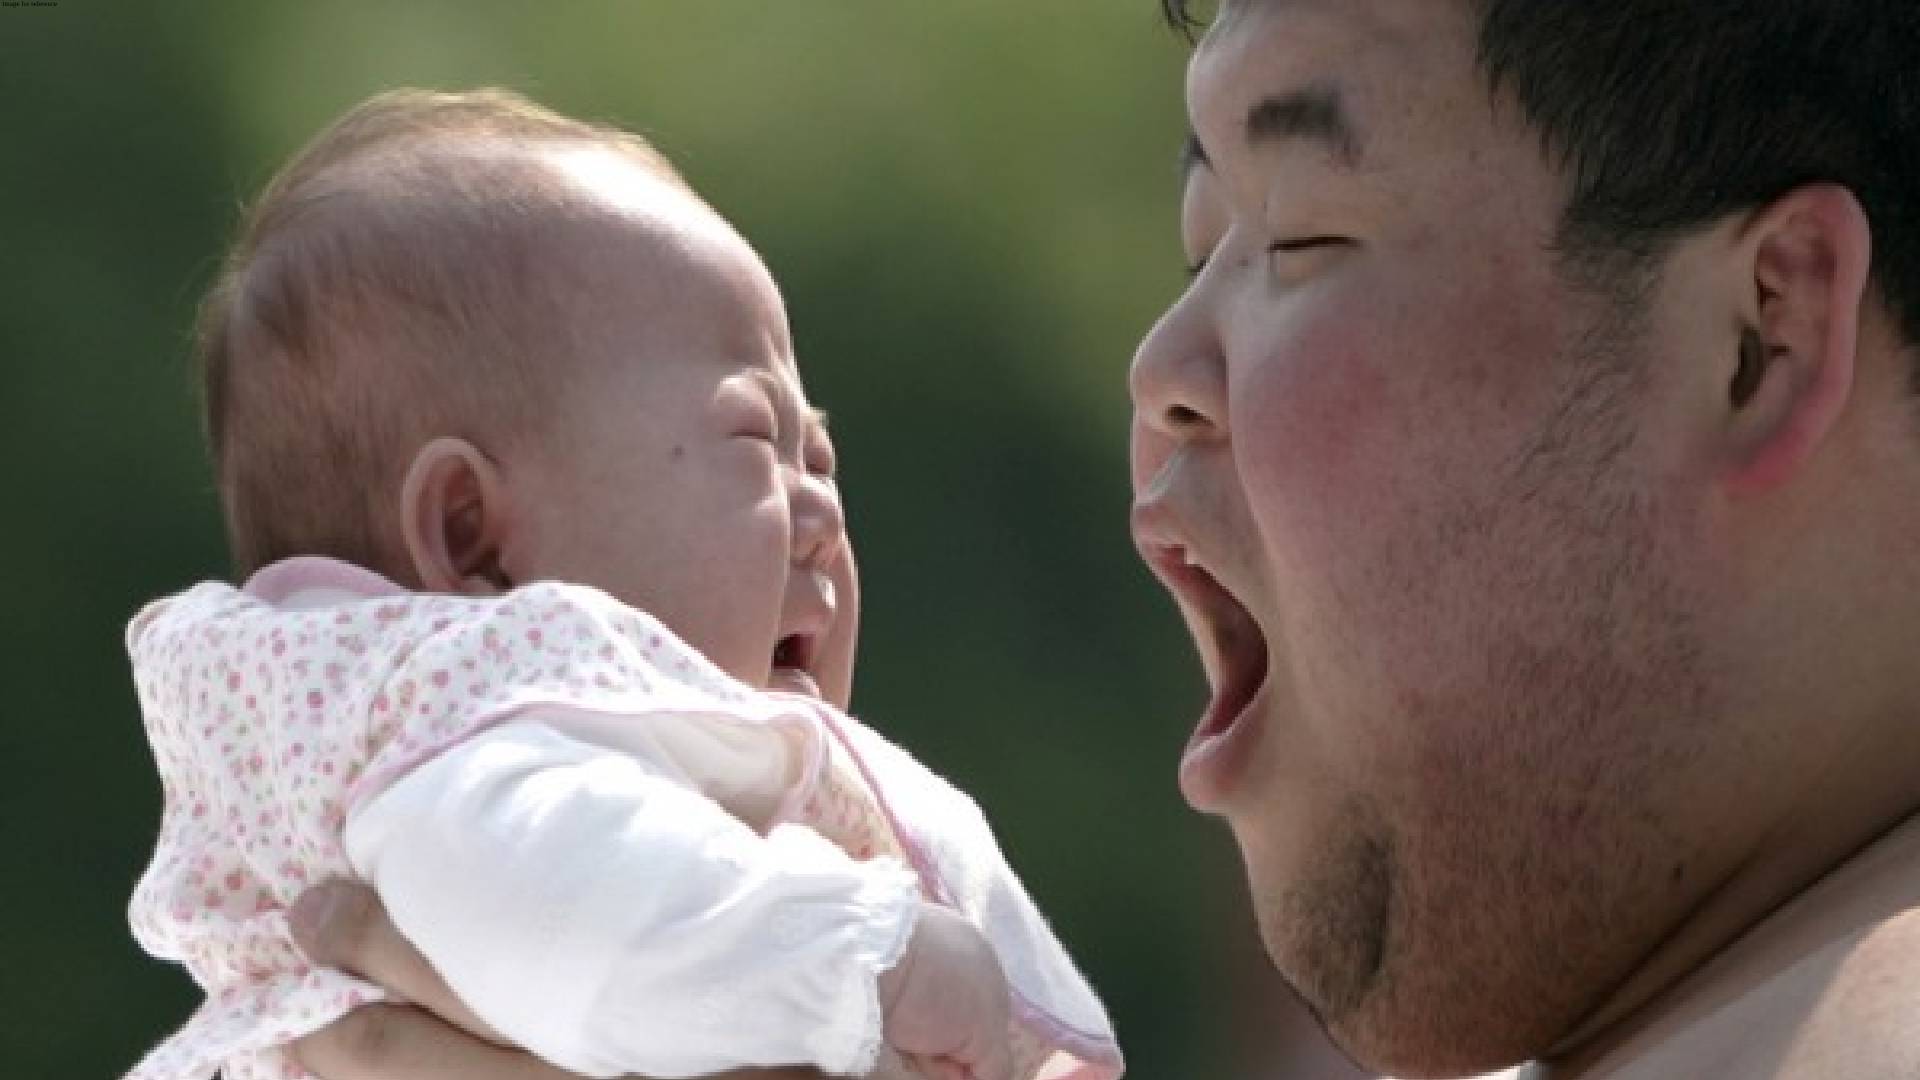 Japan's birth rate hits record low, Tokyo introduces govt dating app to boost marriage rates